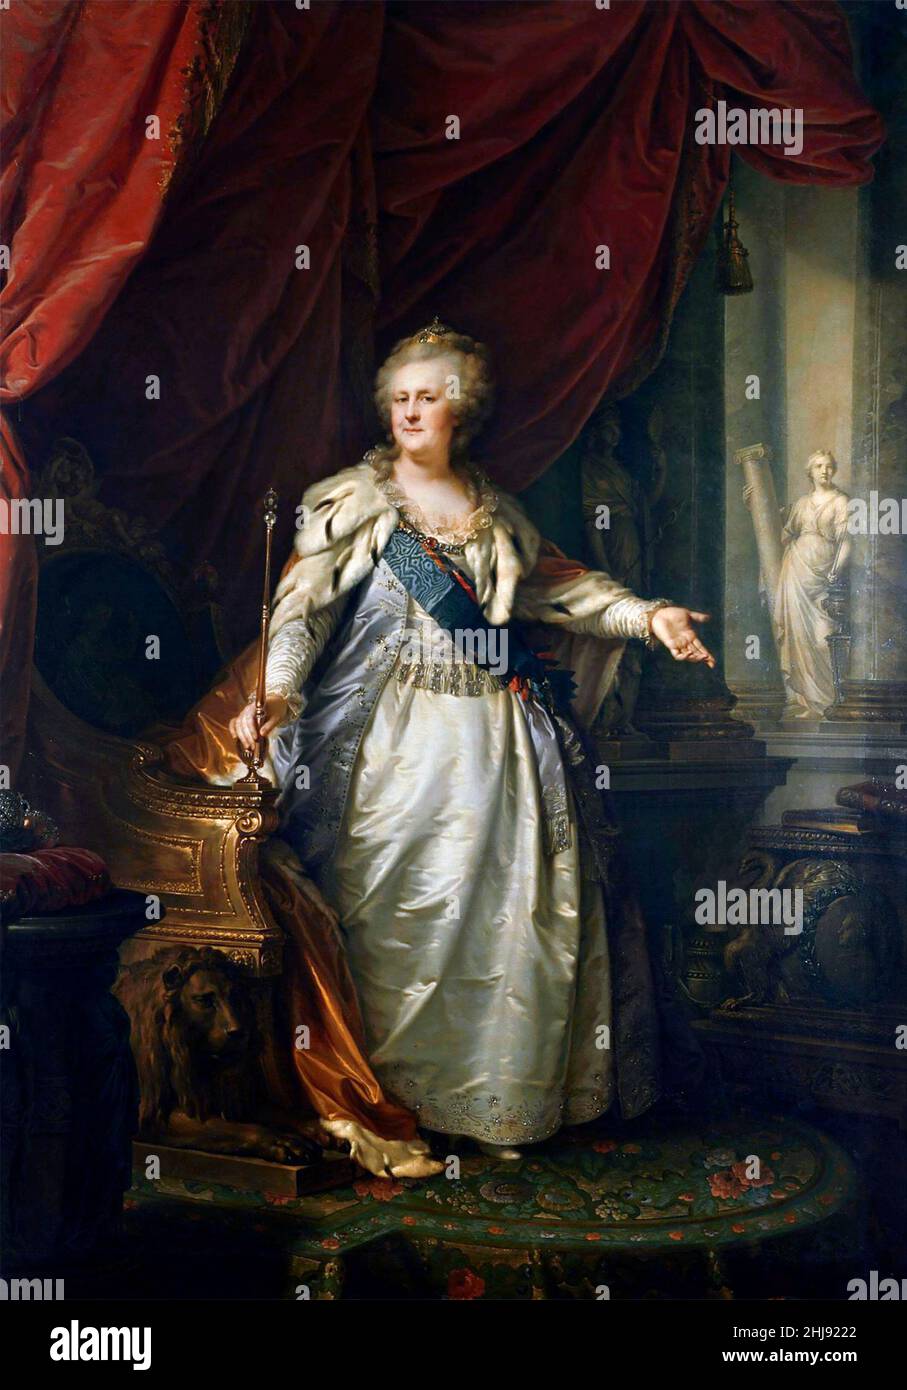 Catherine the Great. Portrait of Catherine II of Russia (1729-1796) by Johann Baptist Lampi the Elder (1751-1830), oil on canvas, 1793 Stock Photo